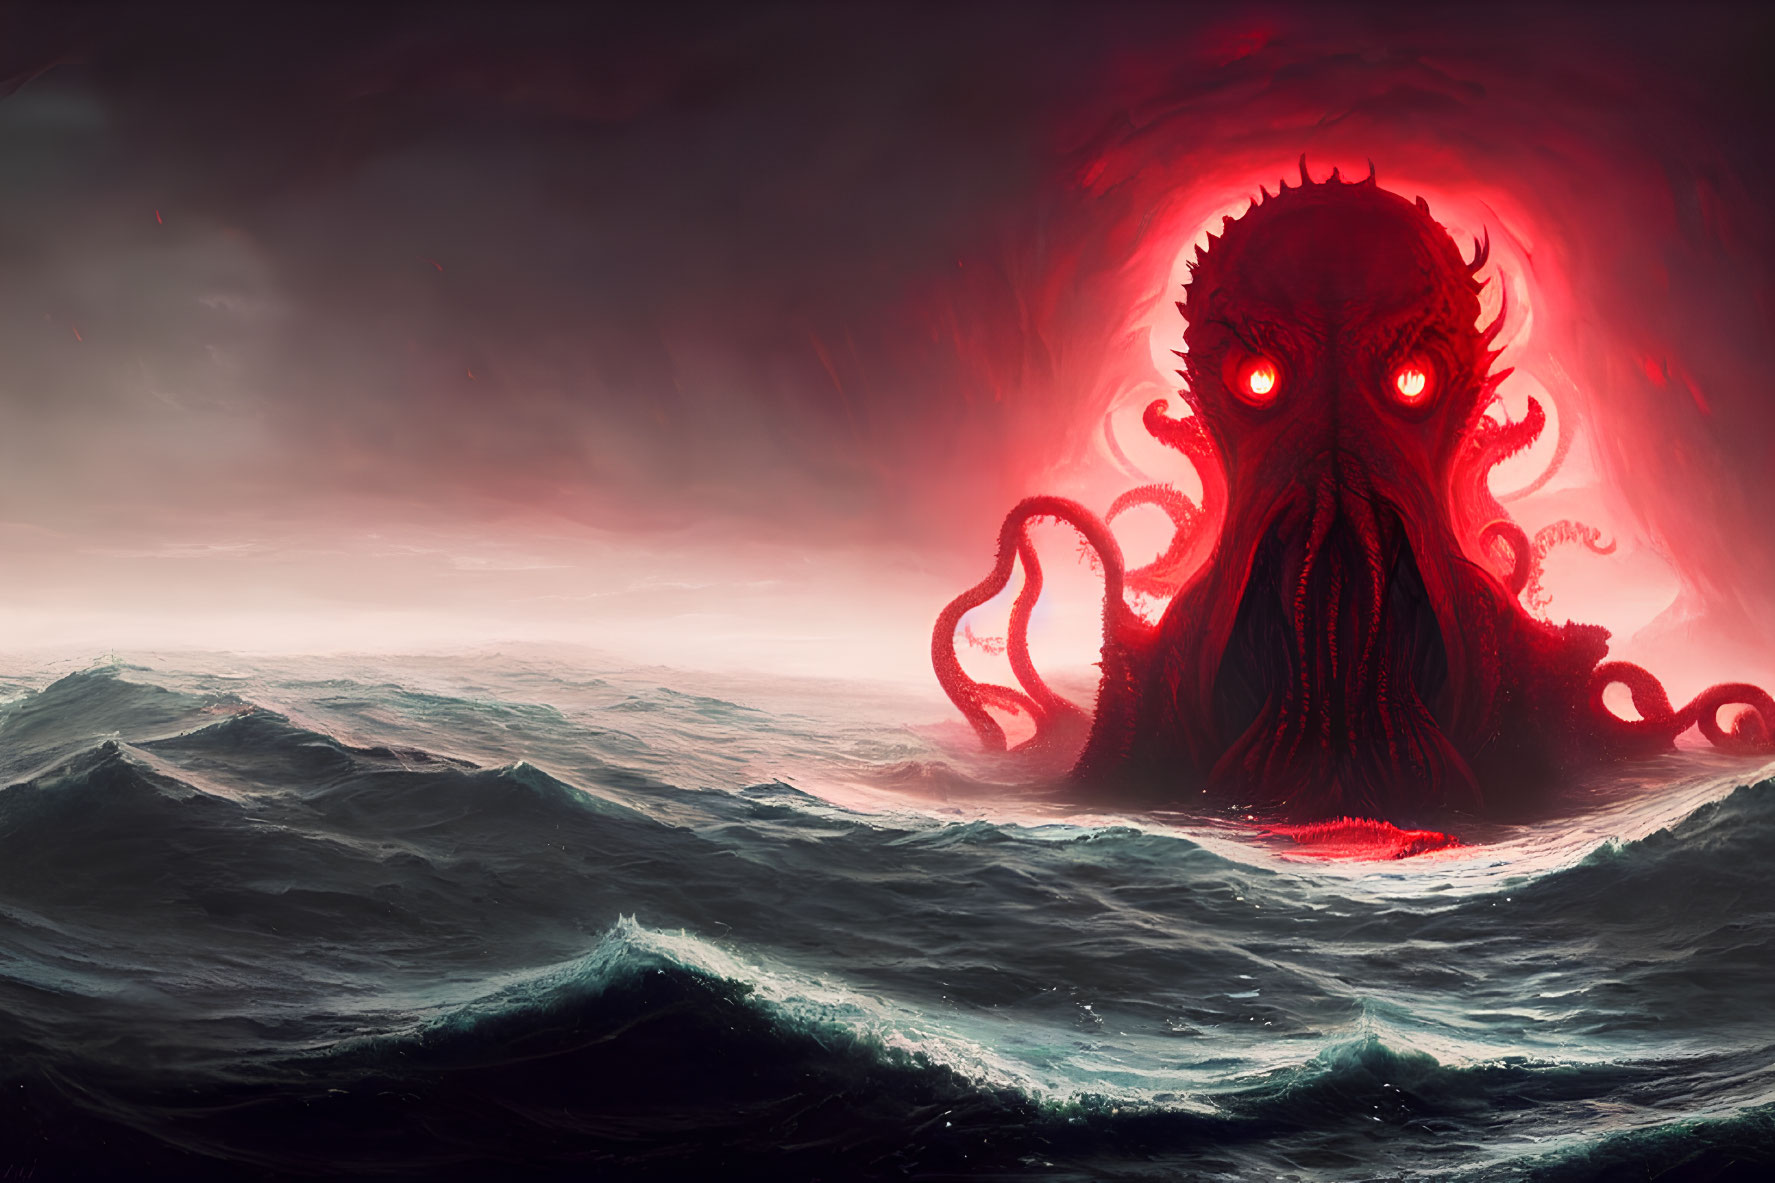 Giant Red-Eyed Sea Creature Emerges from Stormy Ocean